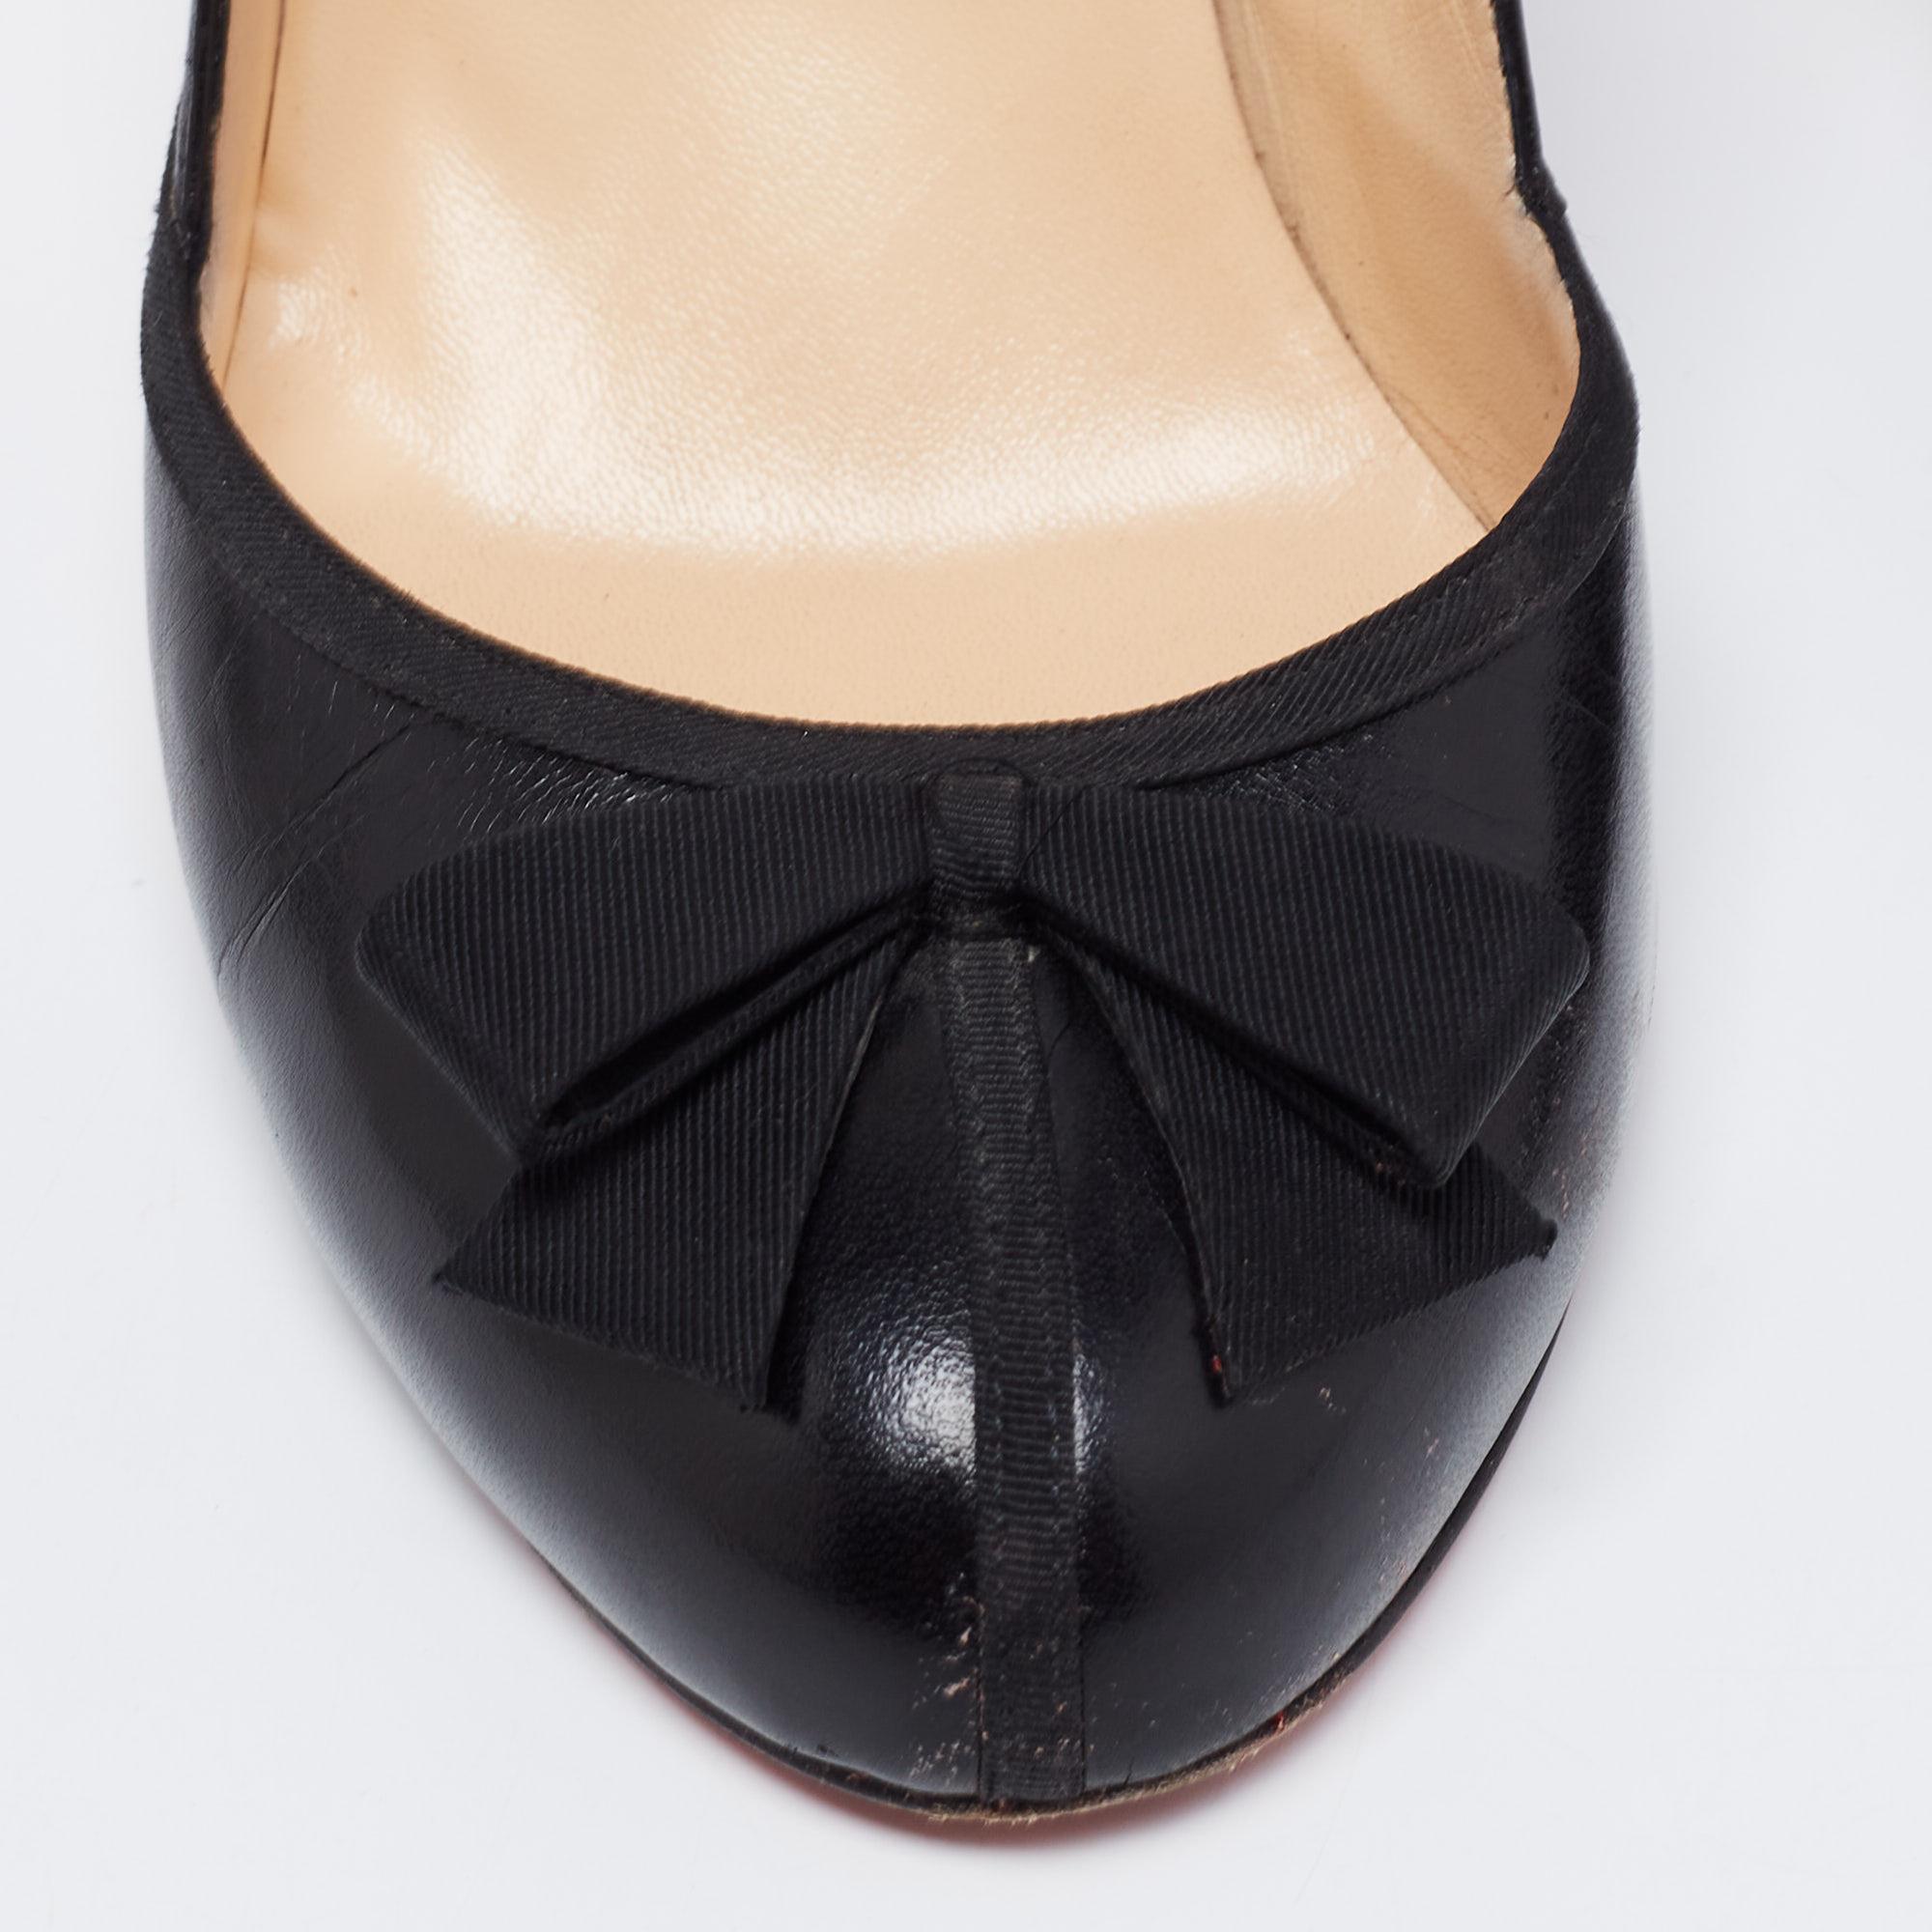 Christian Louboutin Black Leather Fabric Bow Lavalliere Round-Toe Pumps Size 41 2